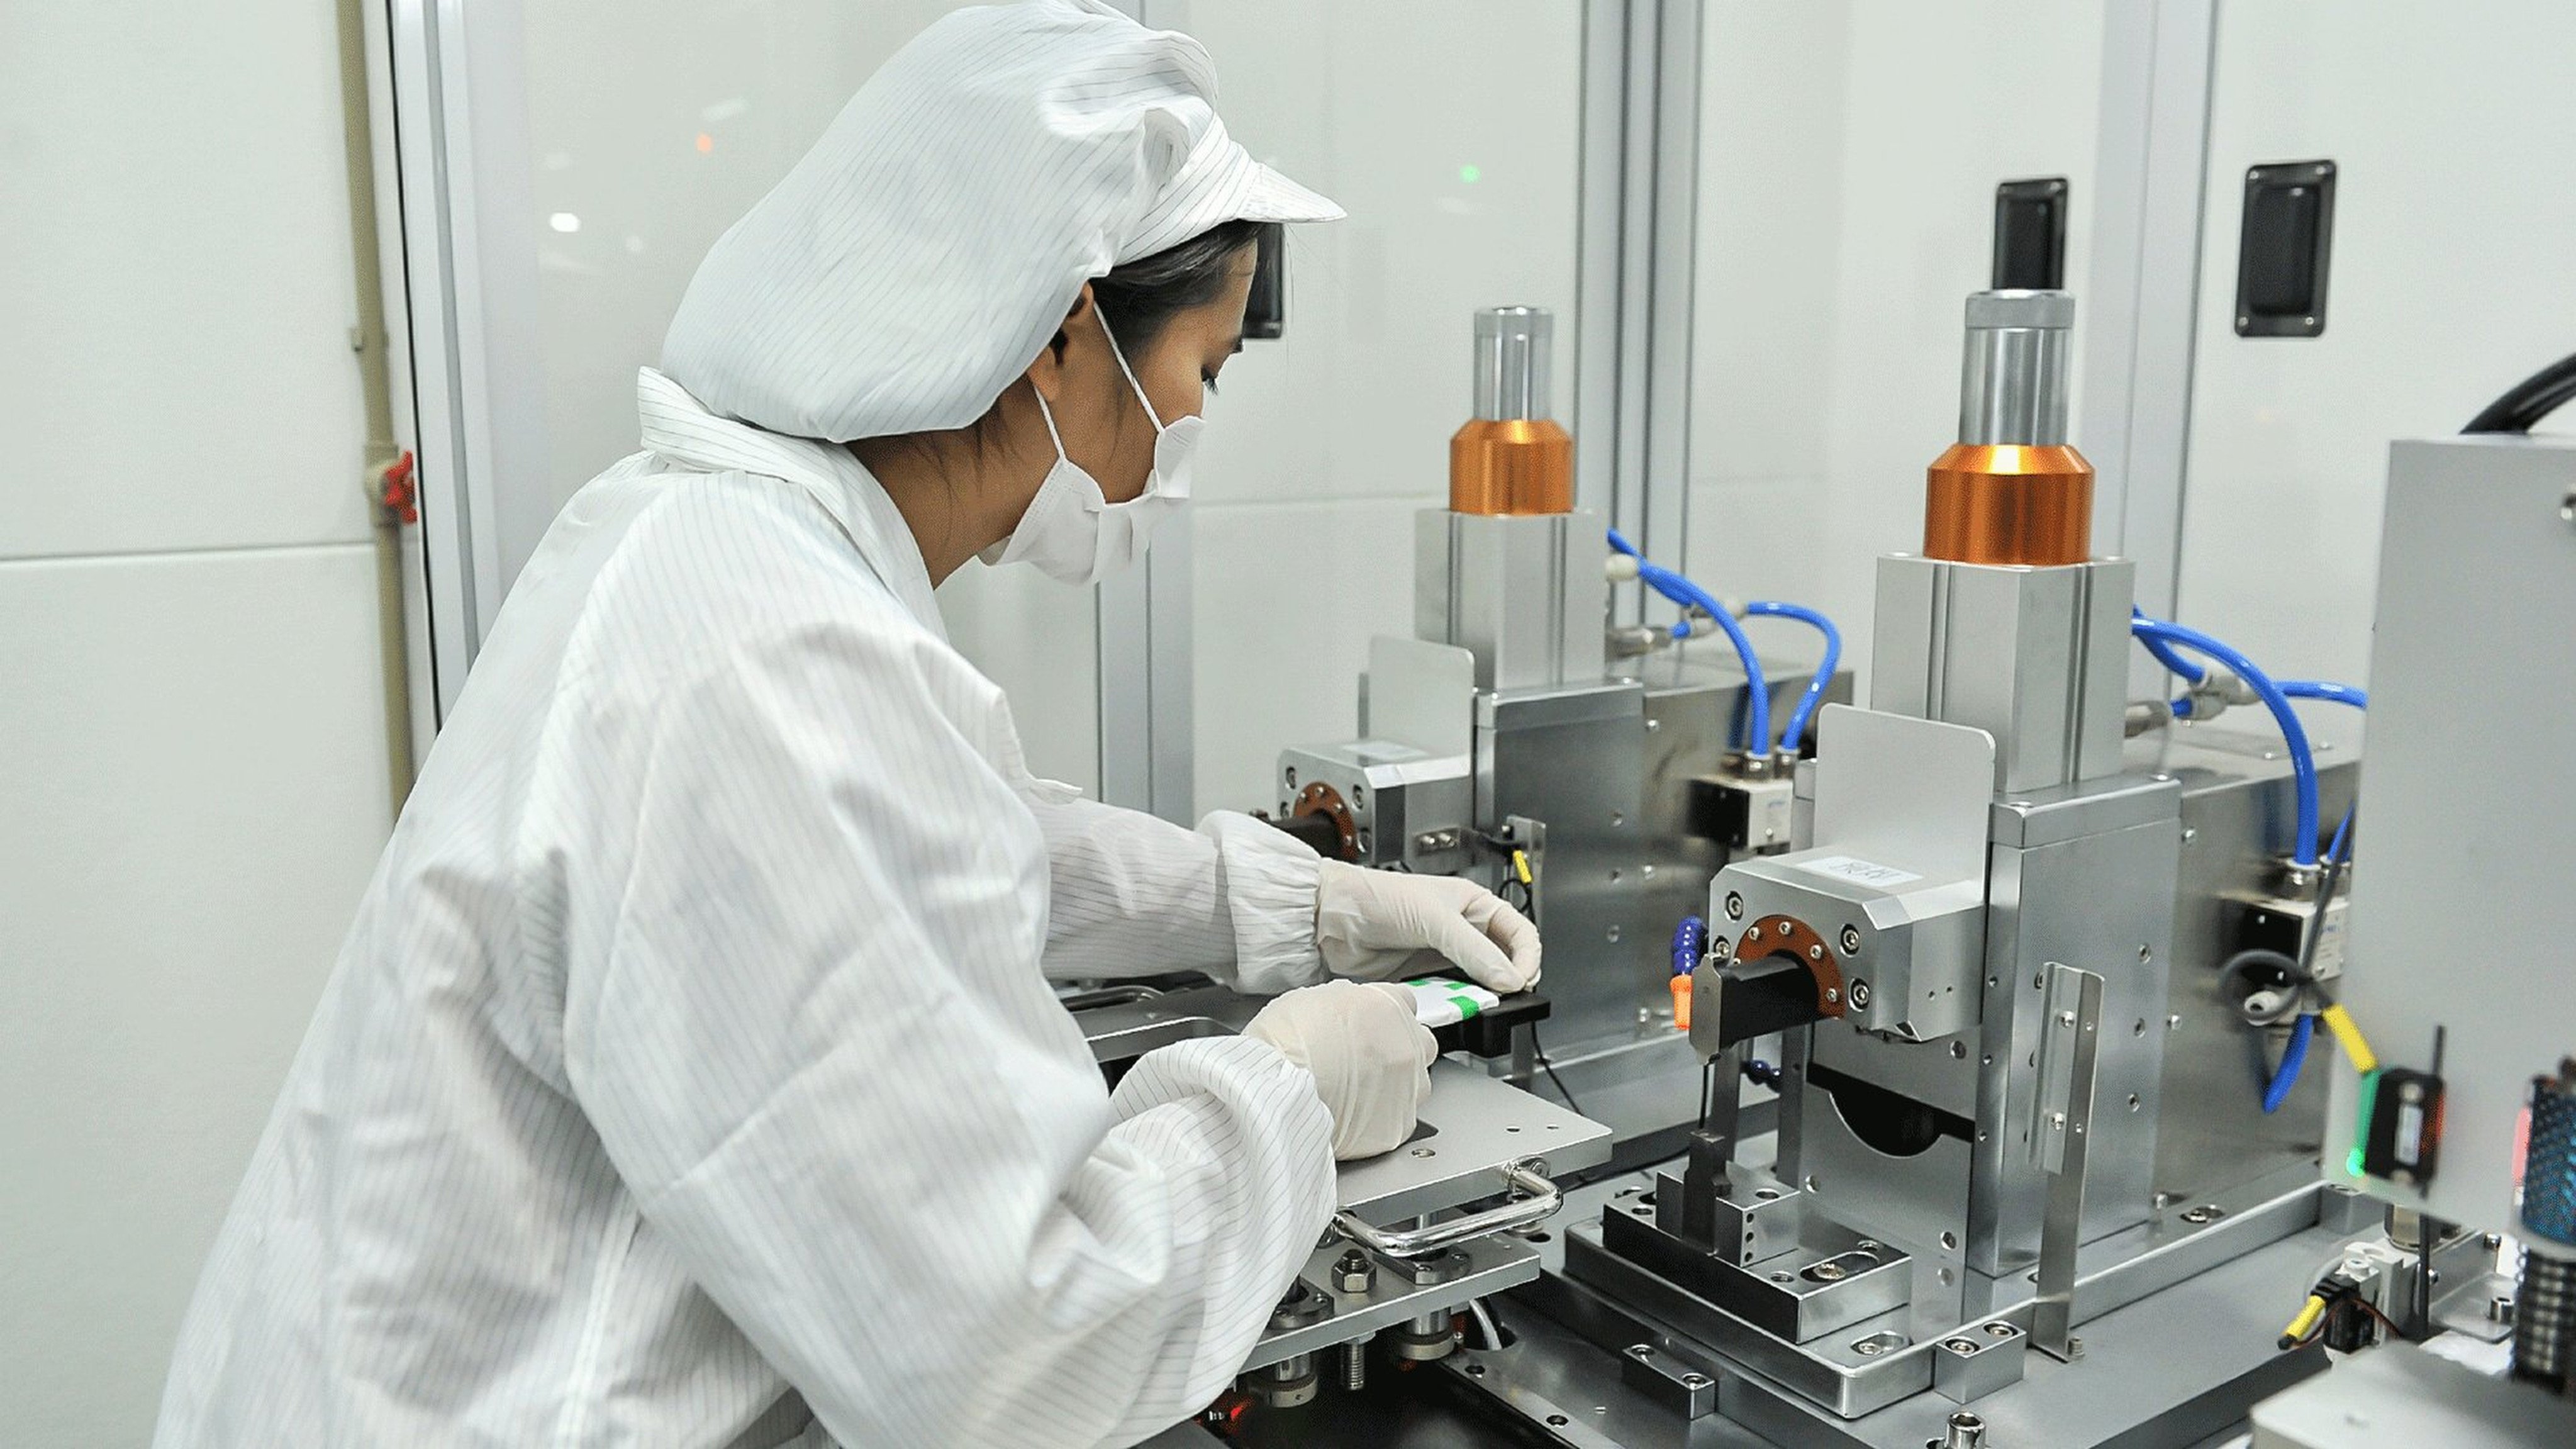 The eco-friendly lithium batteries technology start-up aims to raise US$50 million over the next two years. Photo: GRST